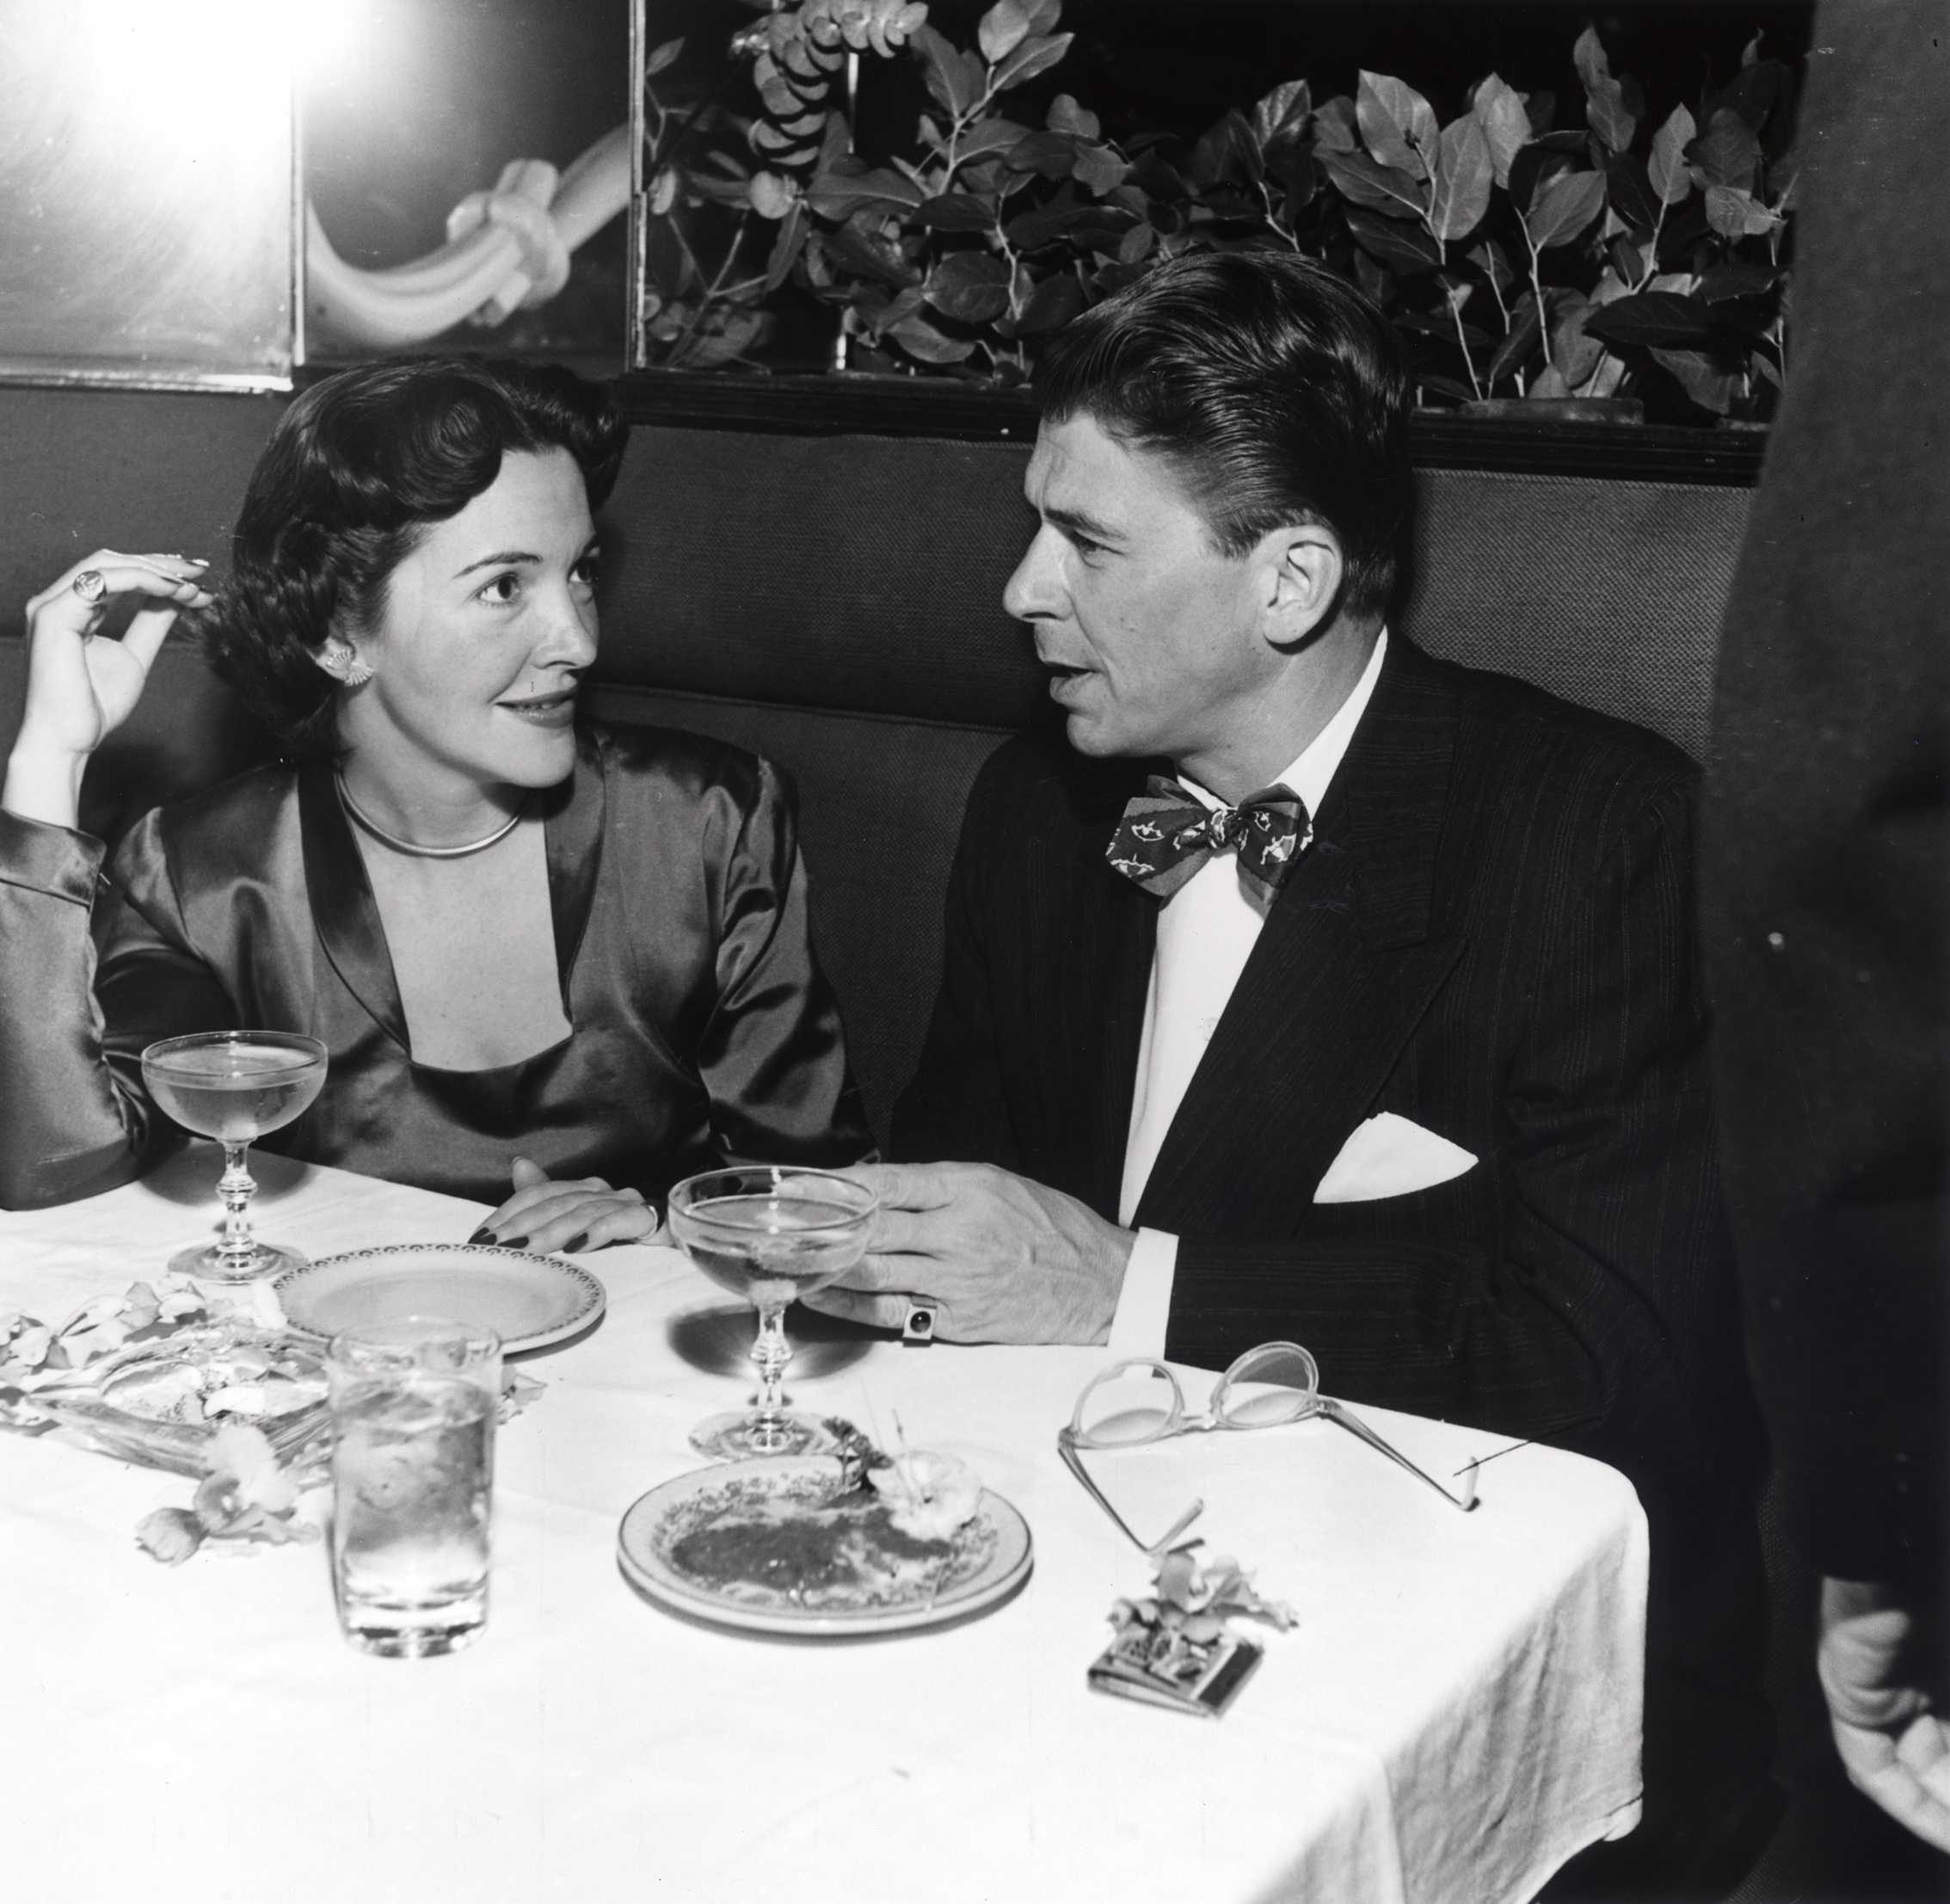 Ronald Reagan and Nancy Davis dating at an unknown restaurant